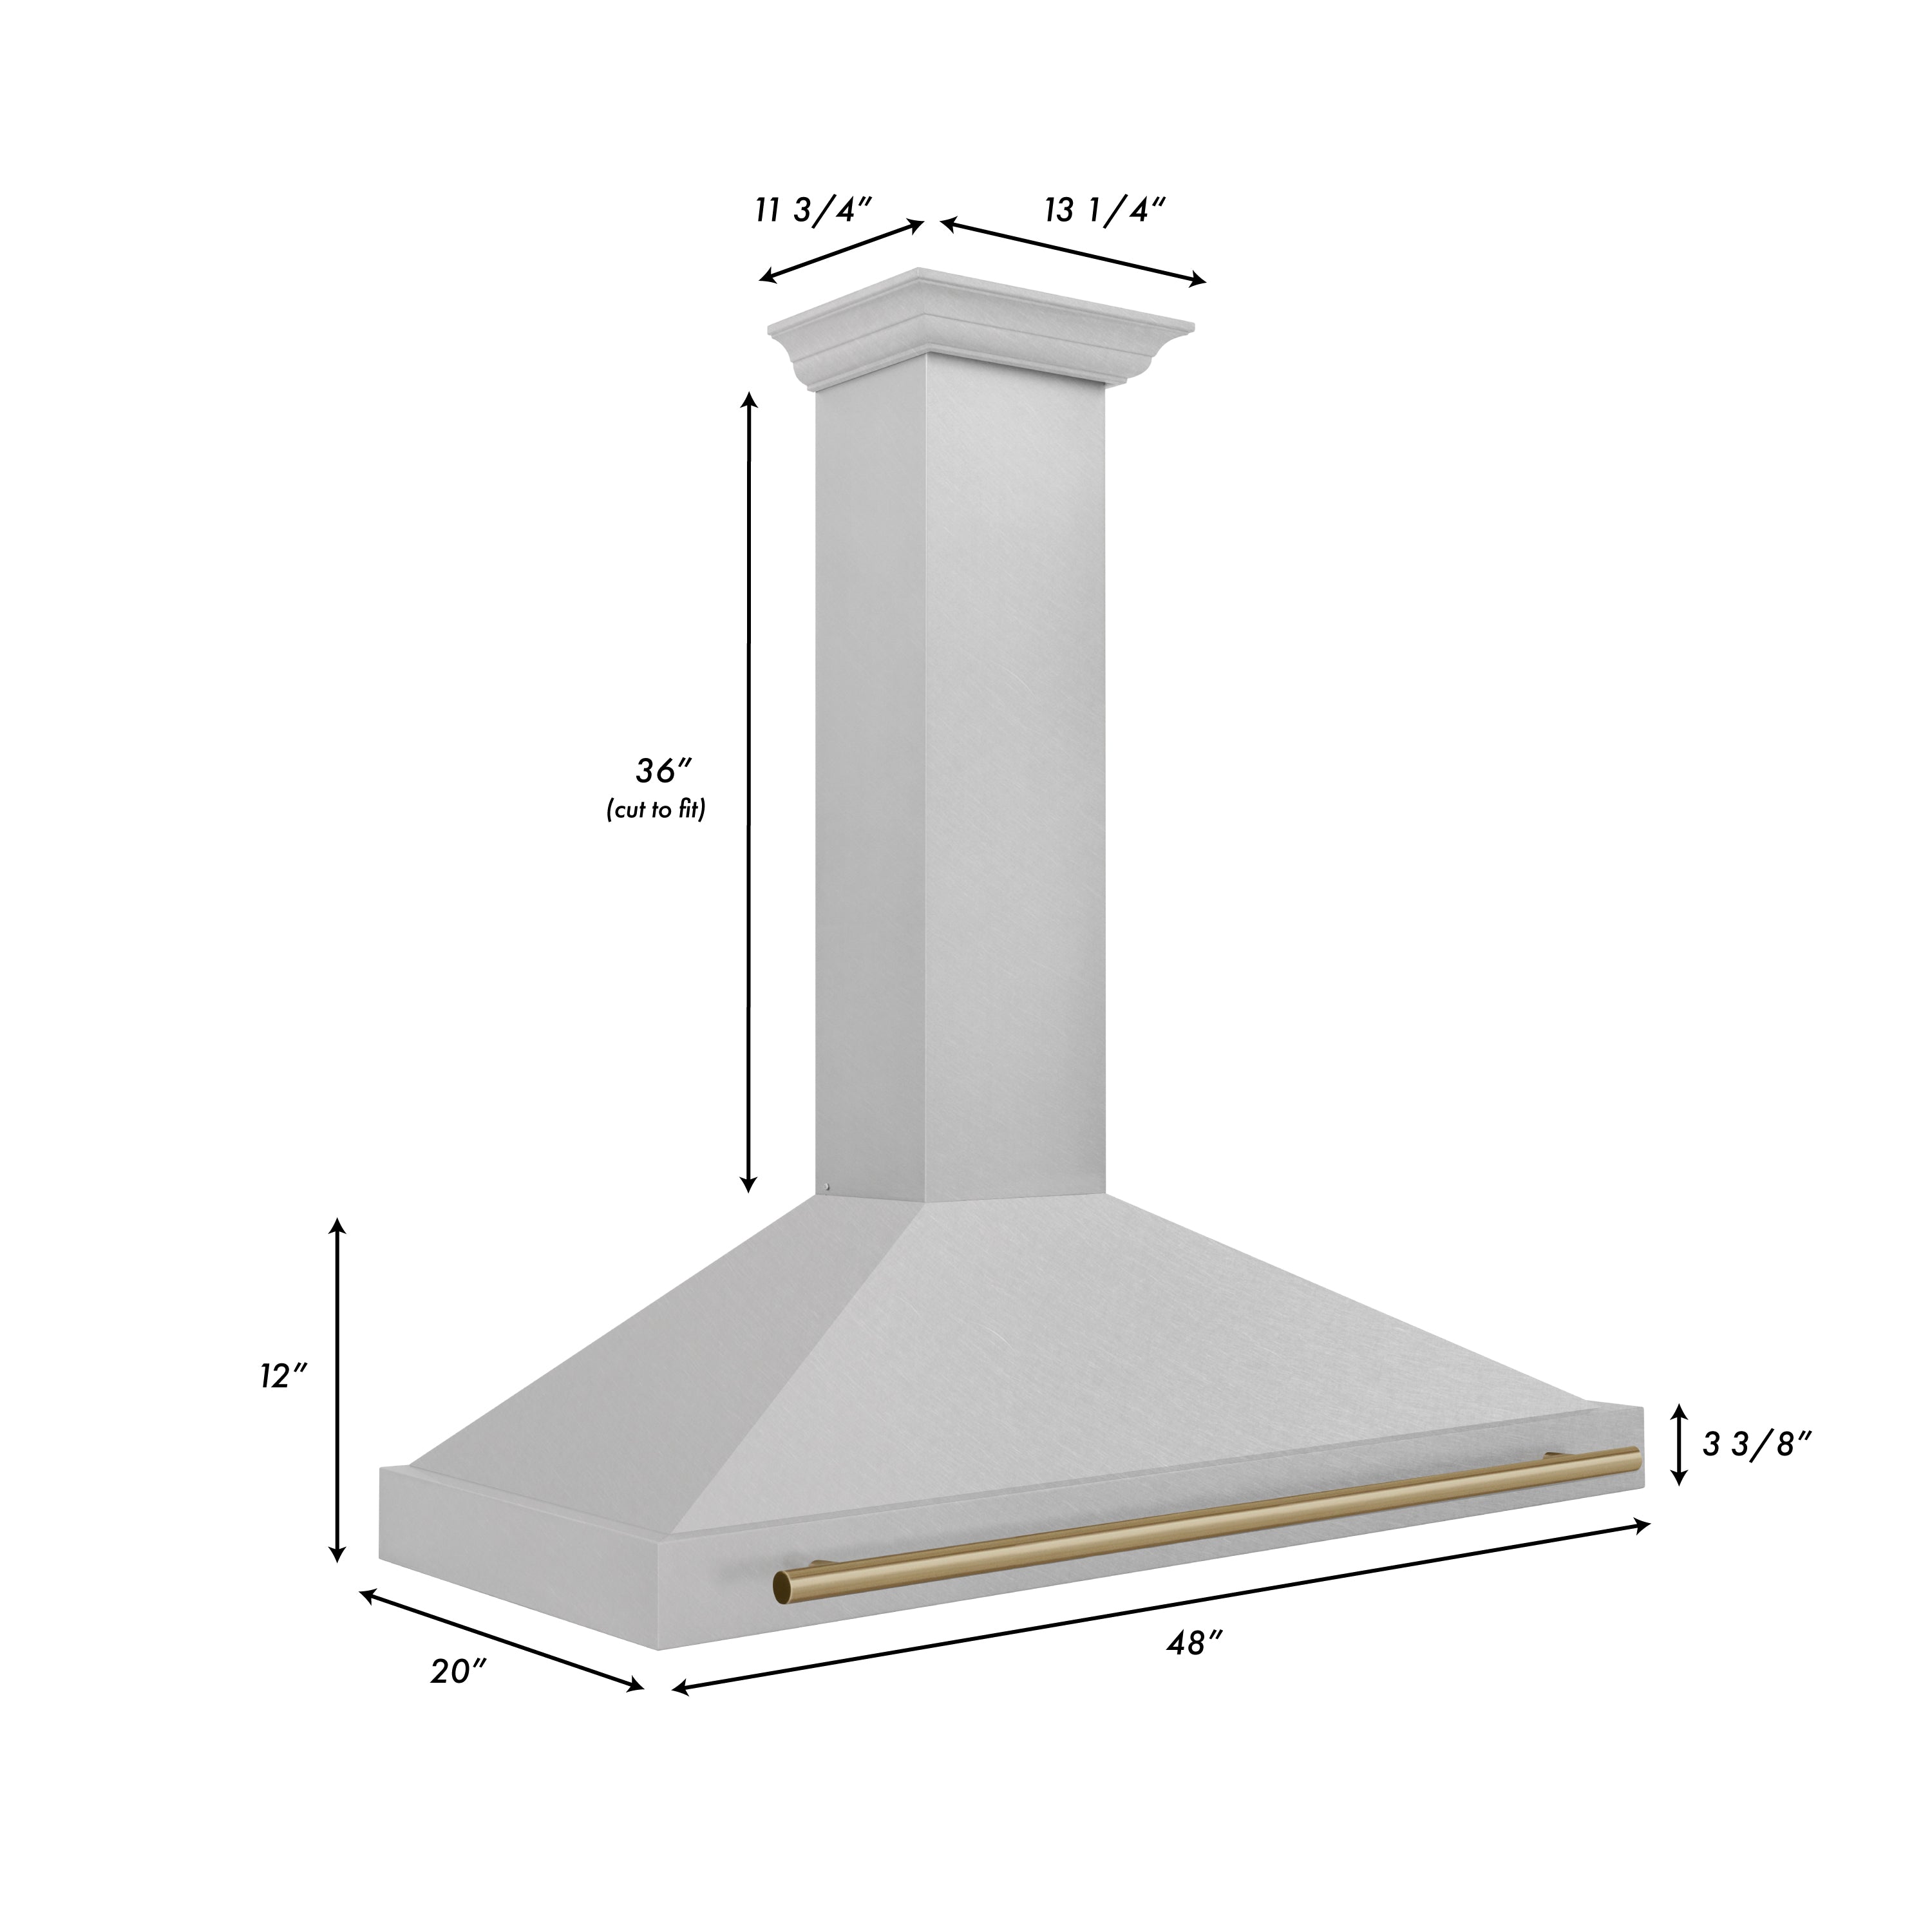 ZLINE 48 in. Autograph Edition DuraSnow Stainless Steel Range Hood with Champagne Bronze Accents dimensions.